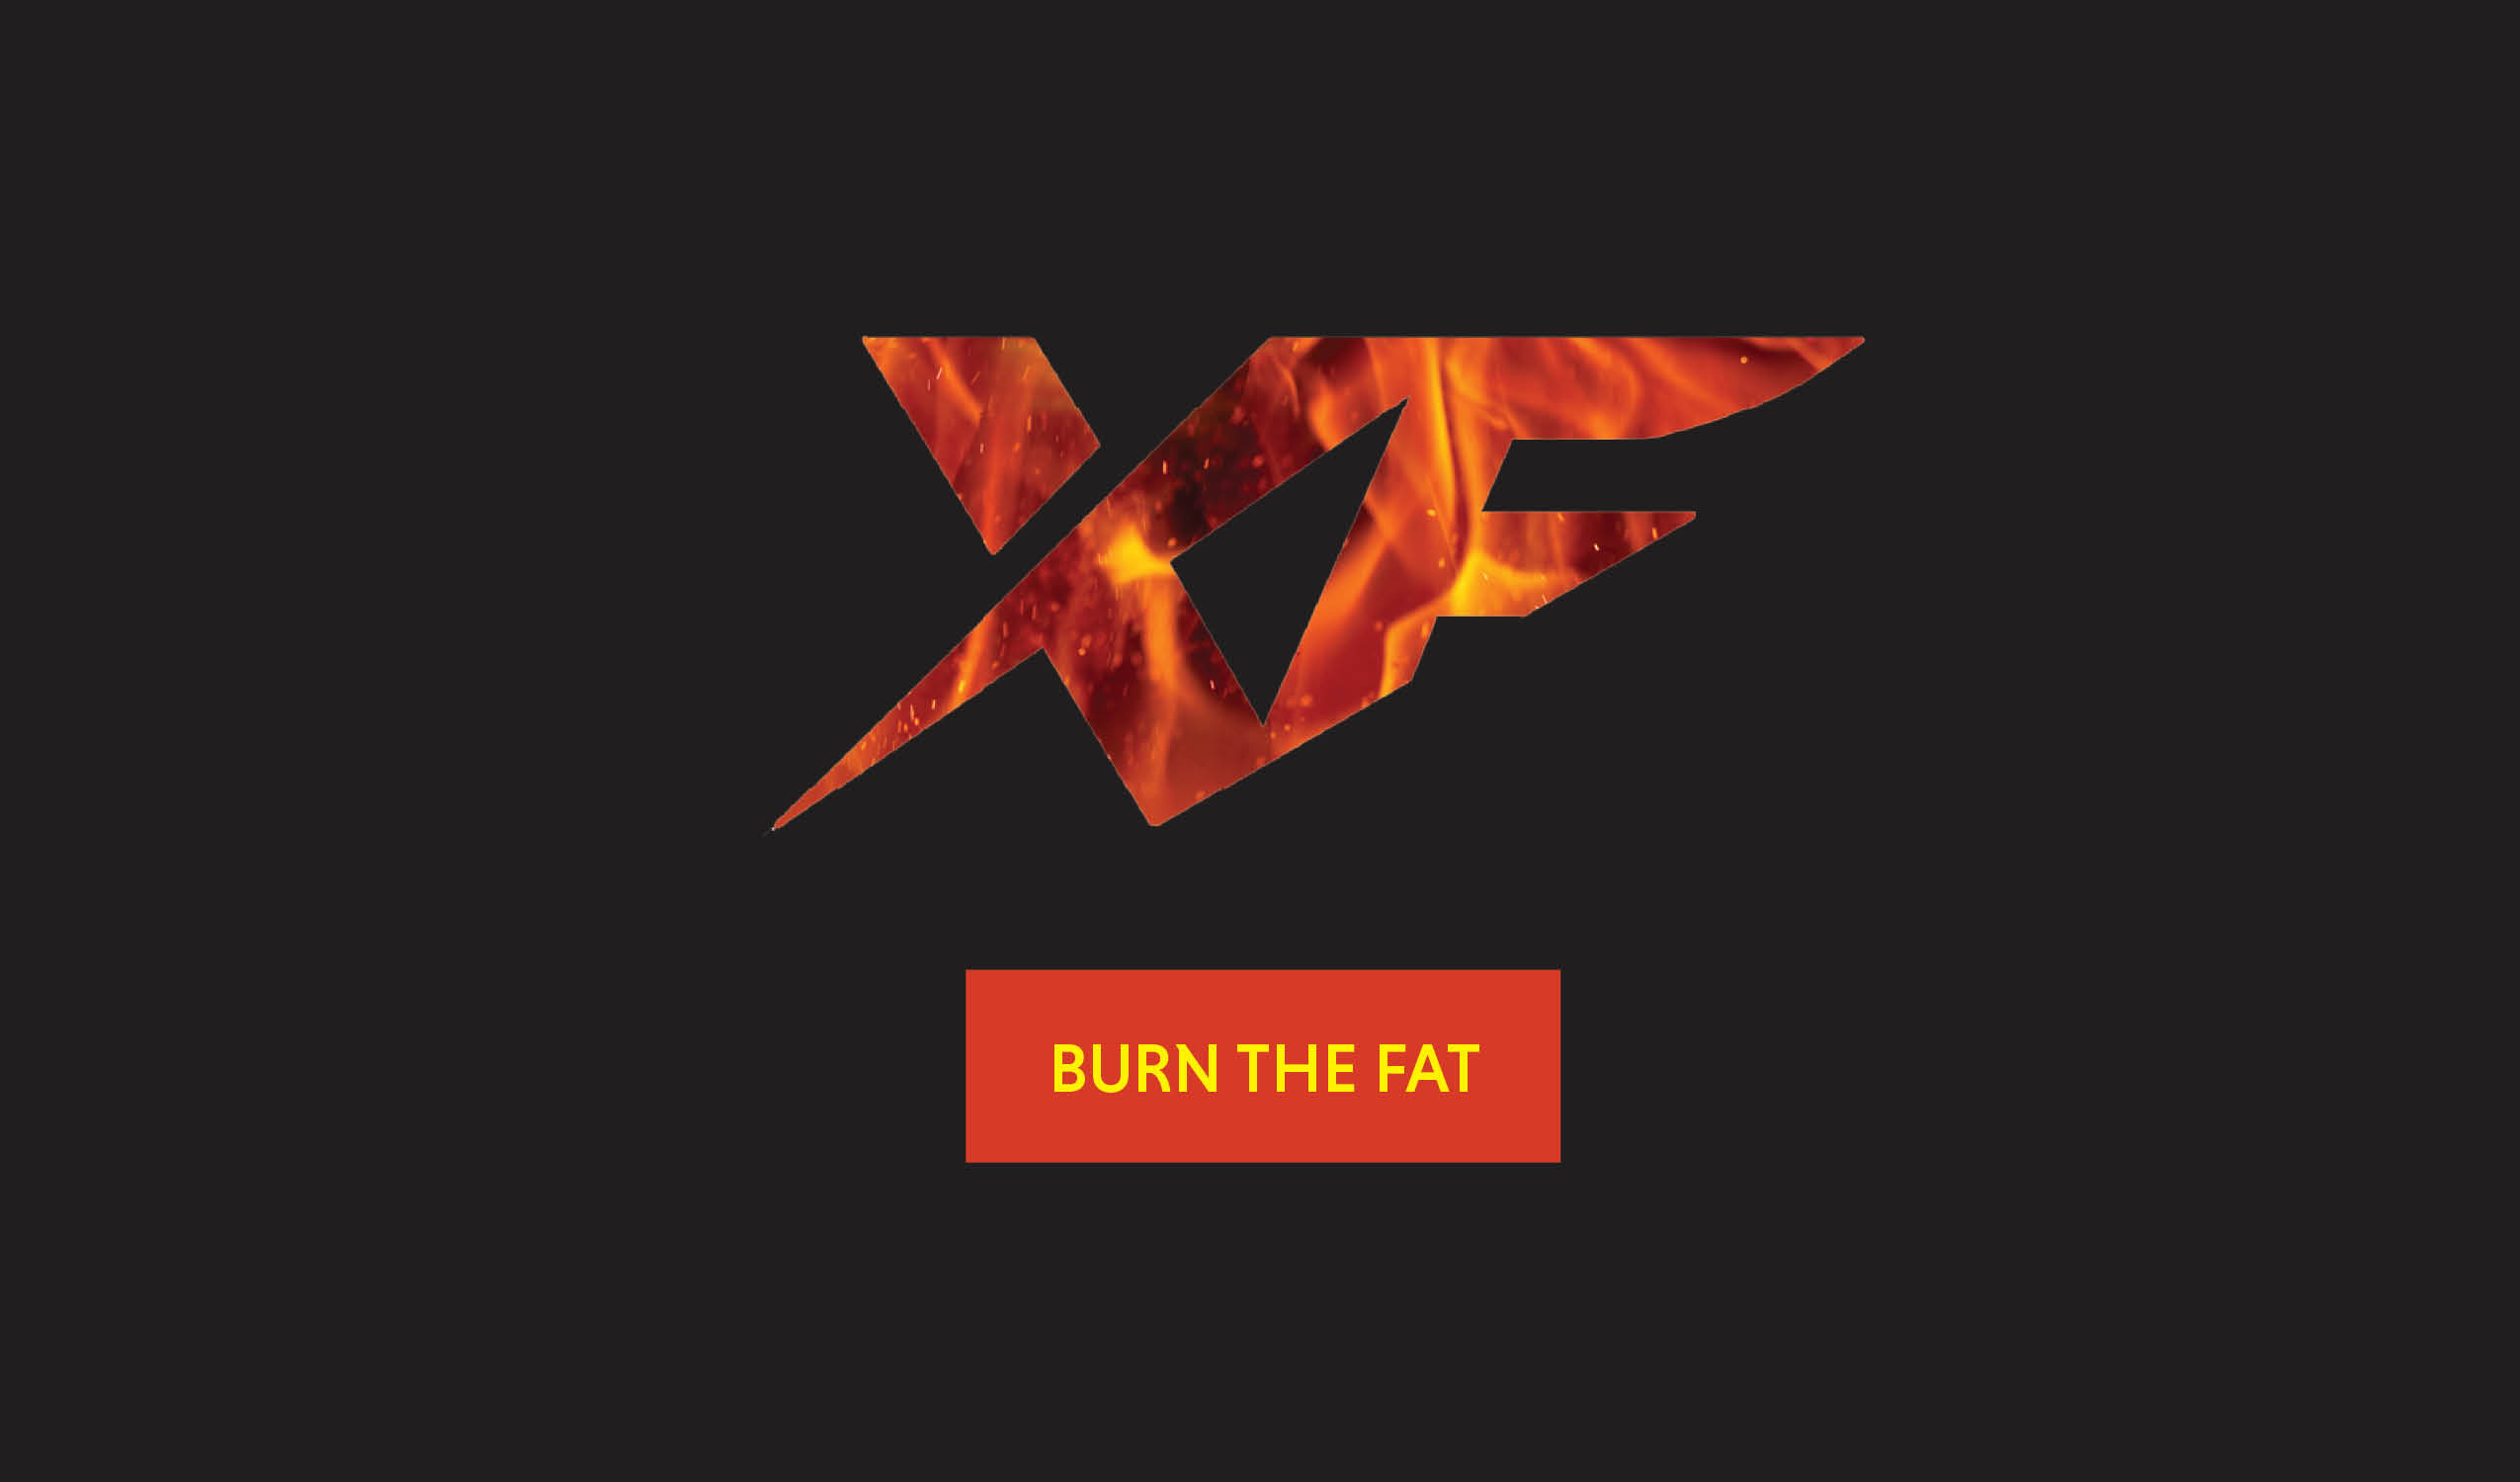 xforce body logo with burn the fat message